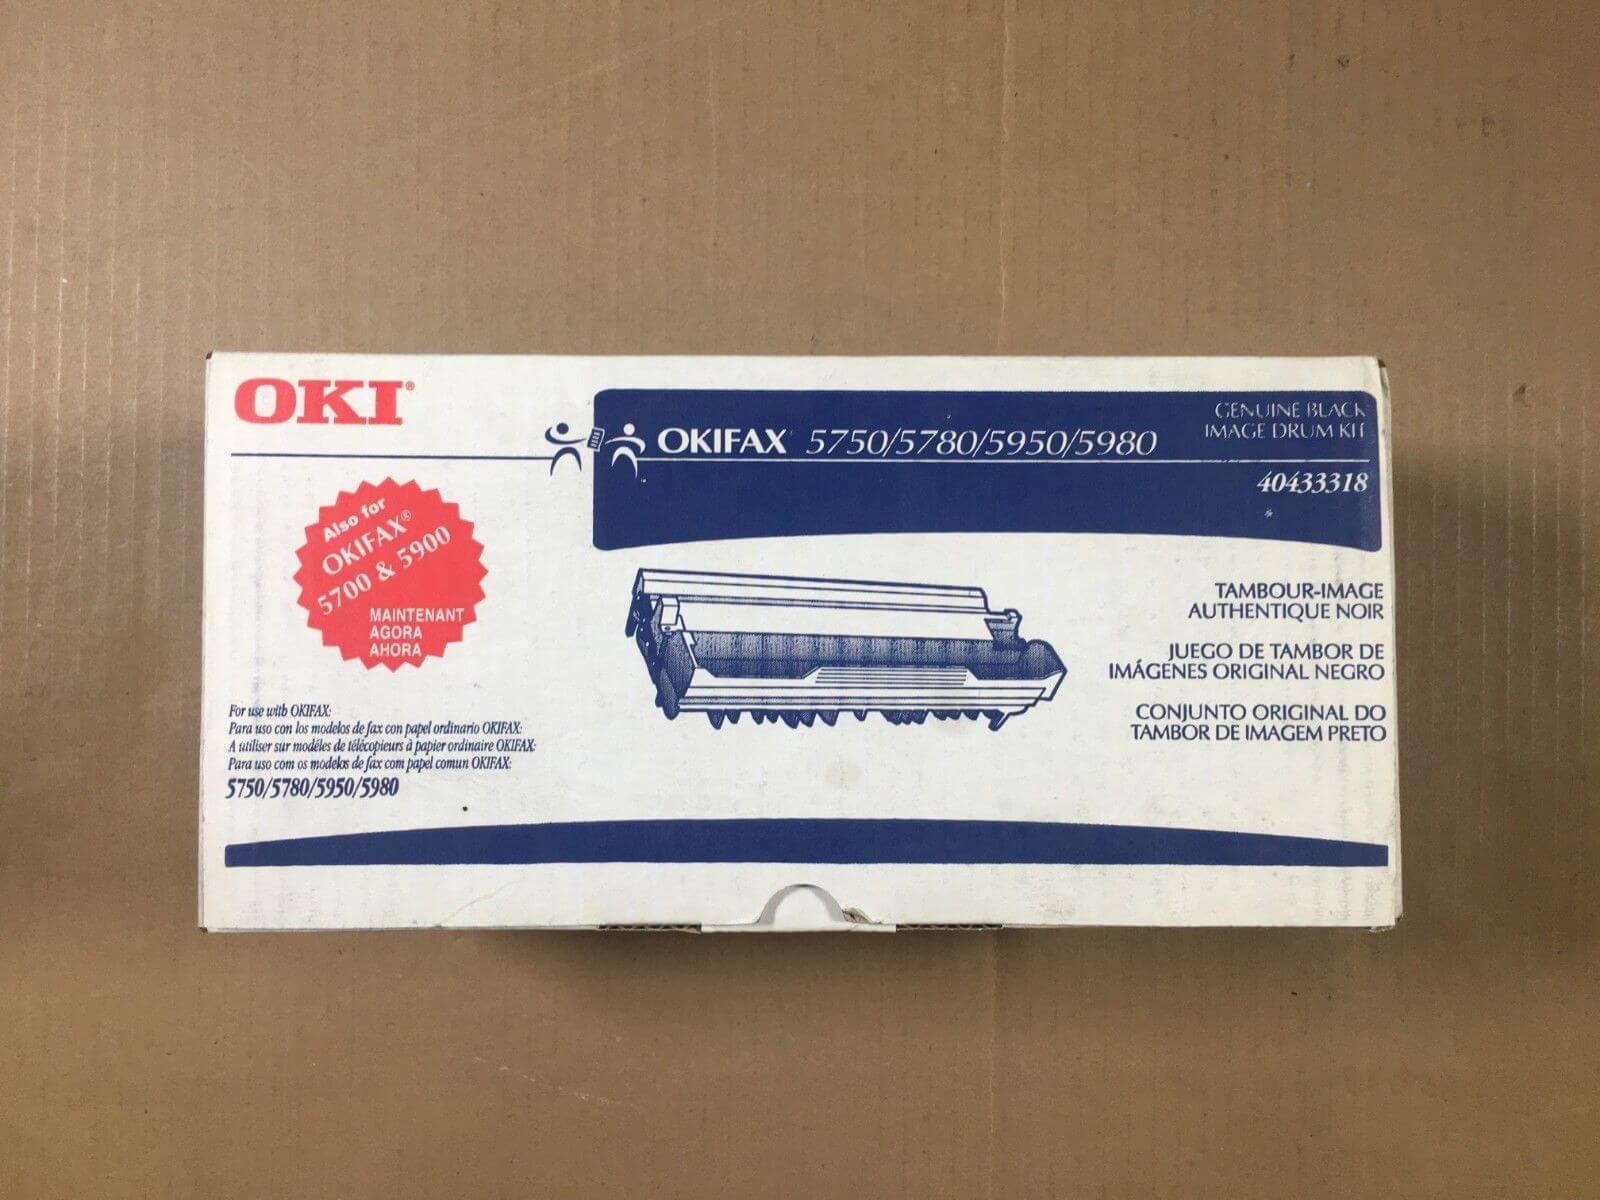 Genuine OKIFAX 5750 Image Drum Kit 40433318 Same Day Shipping - copier-clearance-center